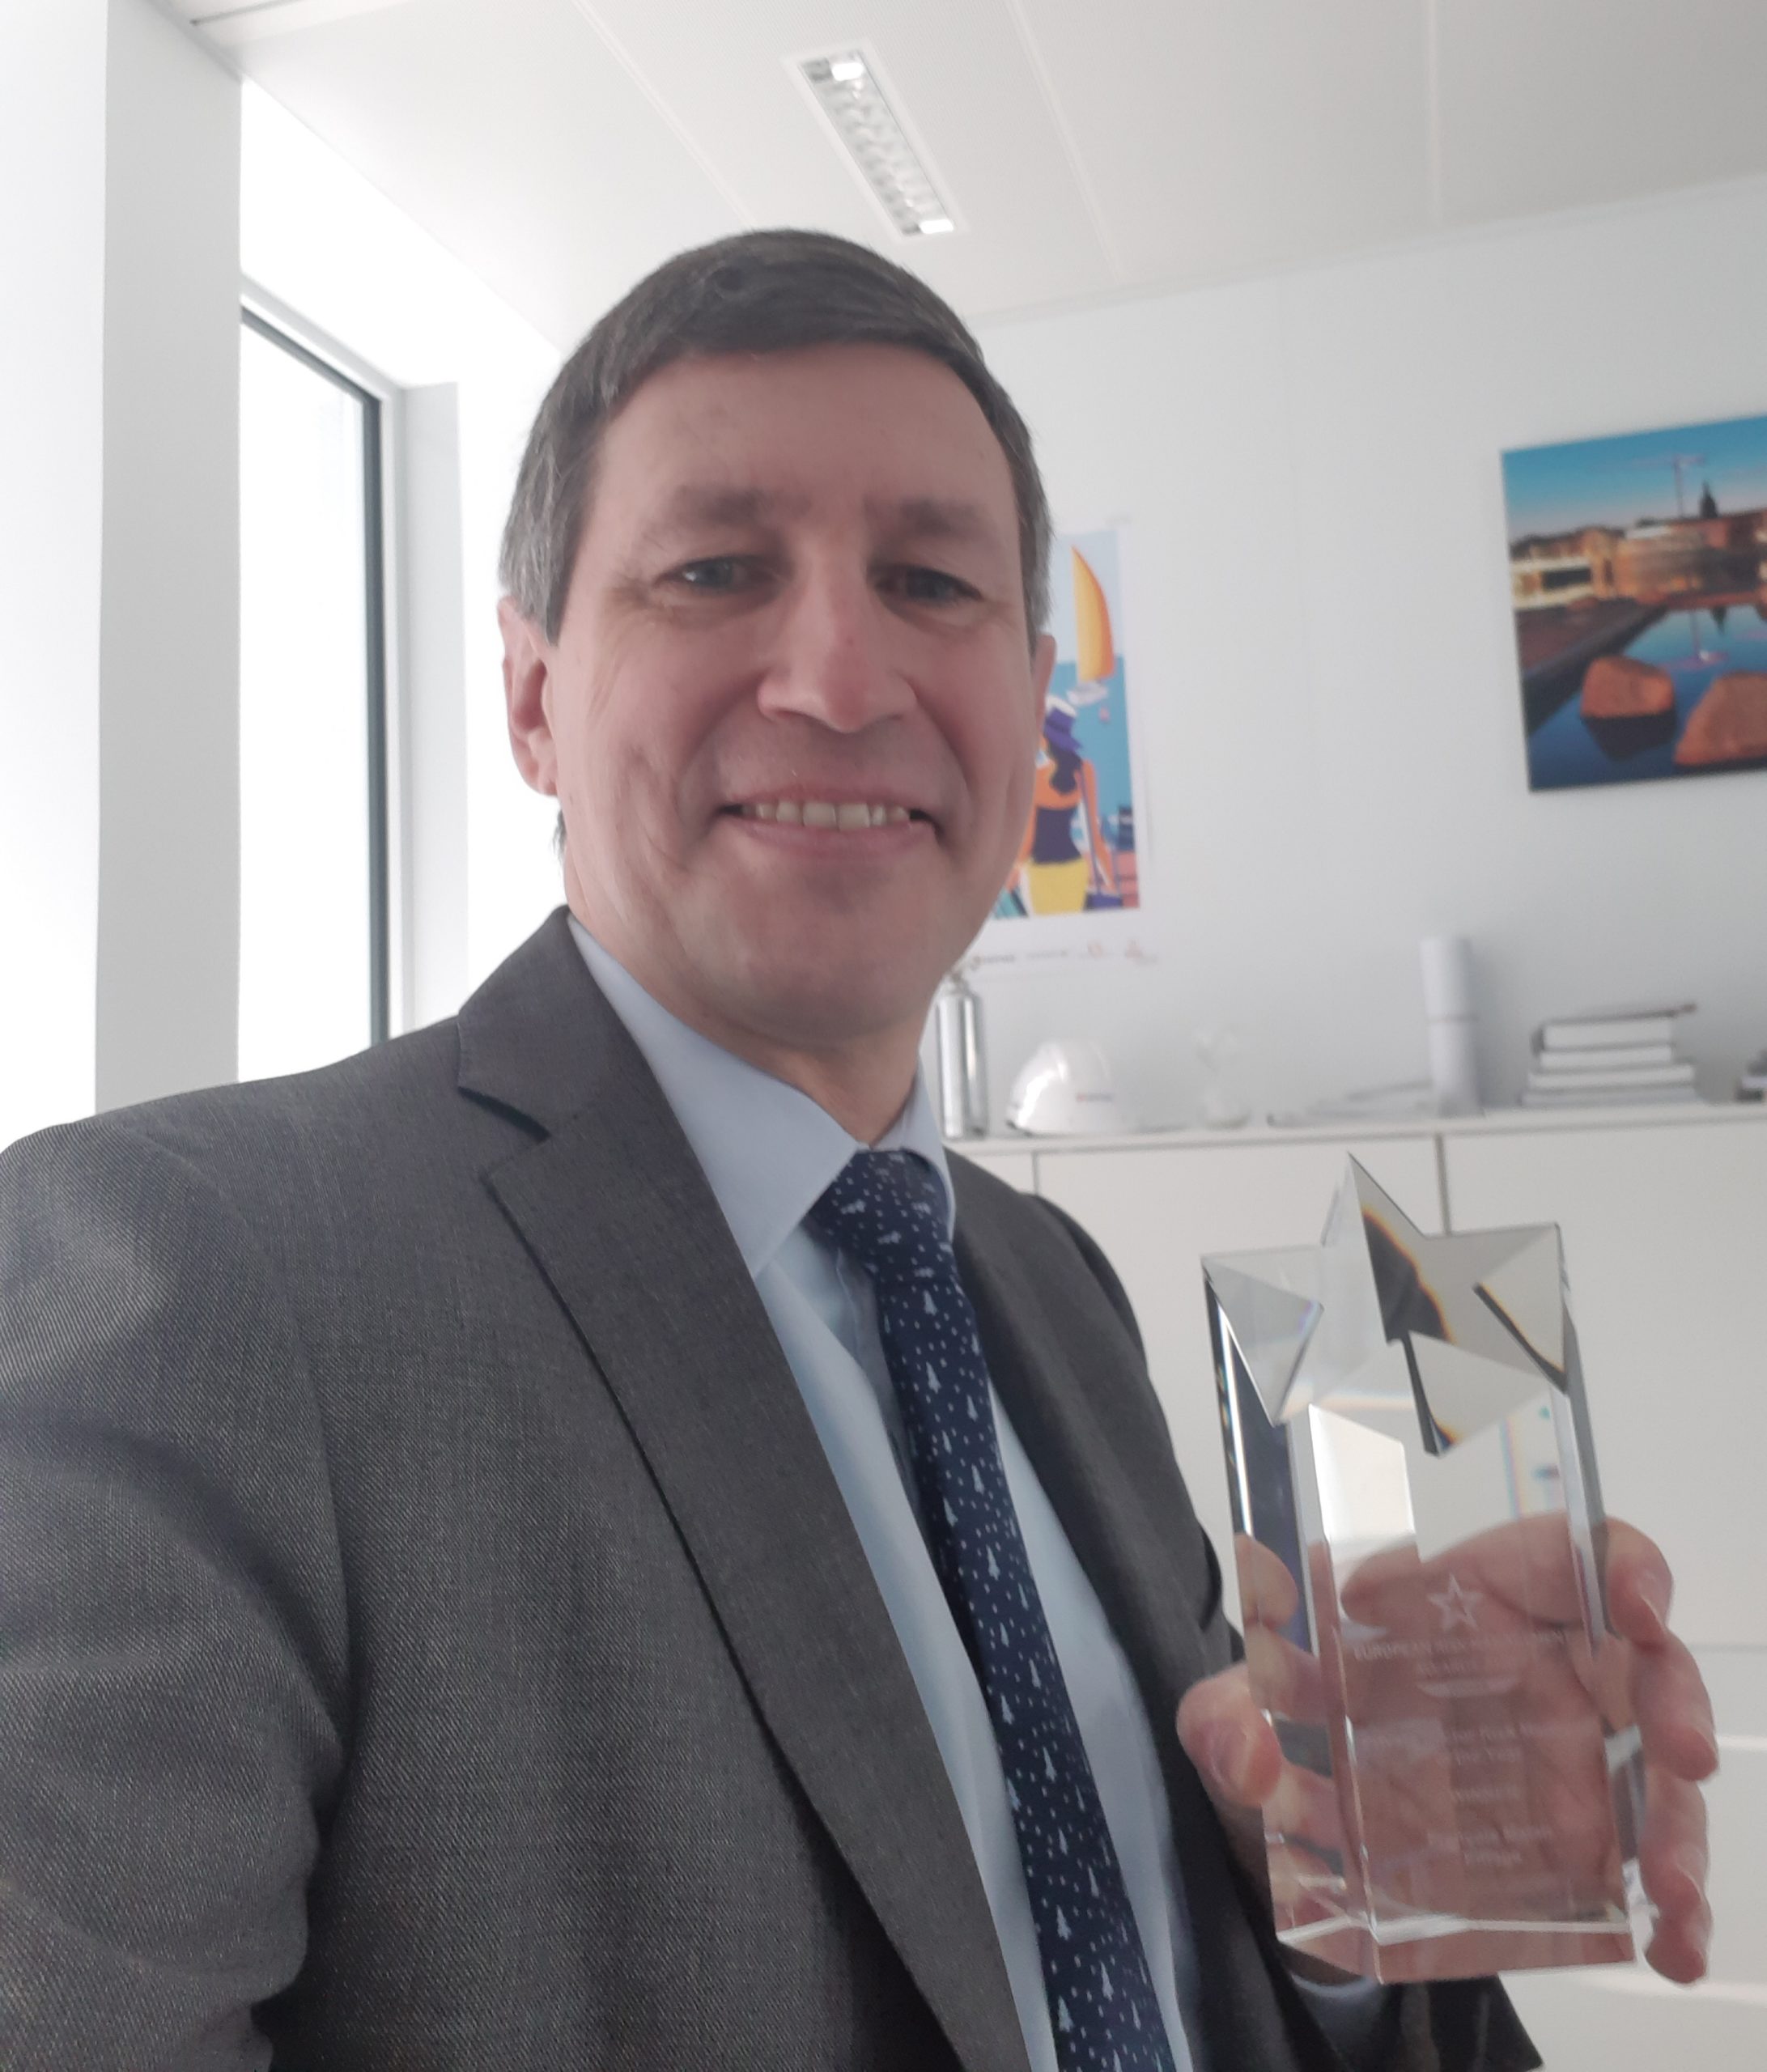 Francois Malan Risk Manager of the year 2020